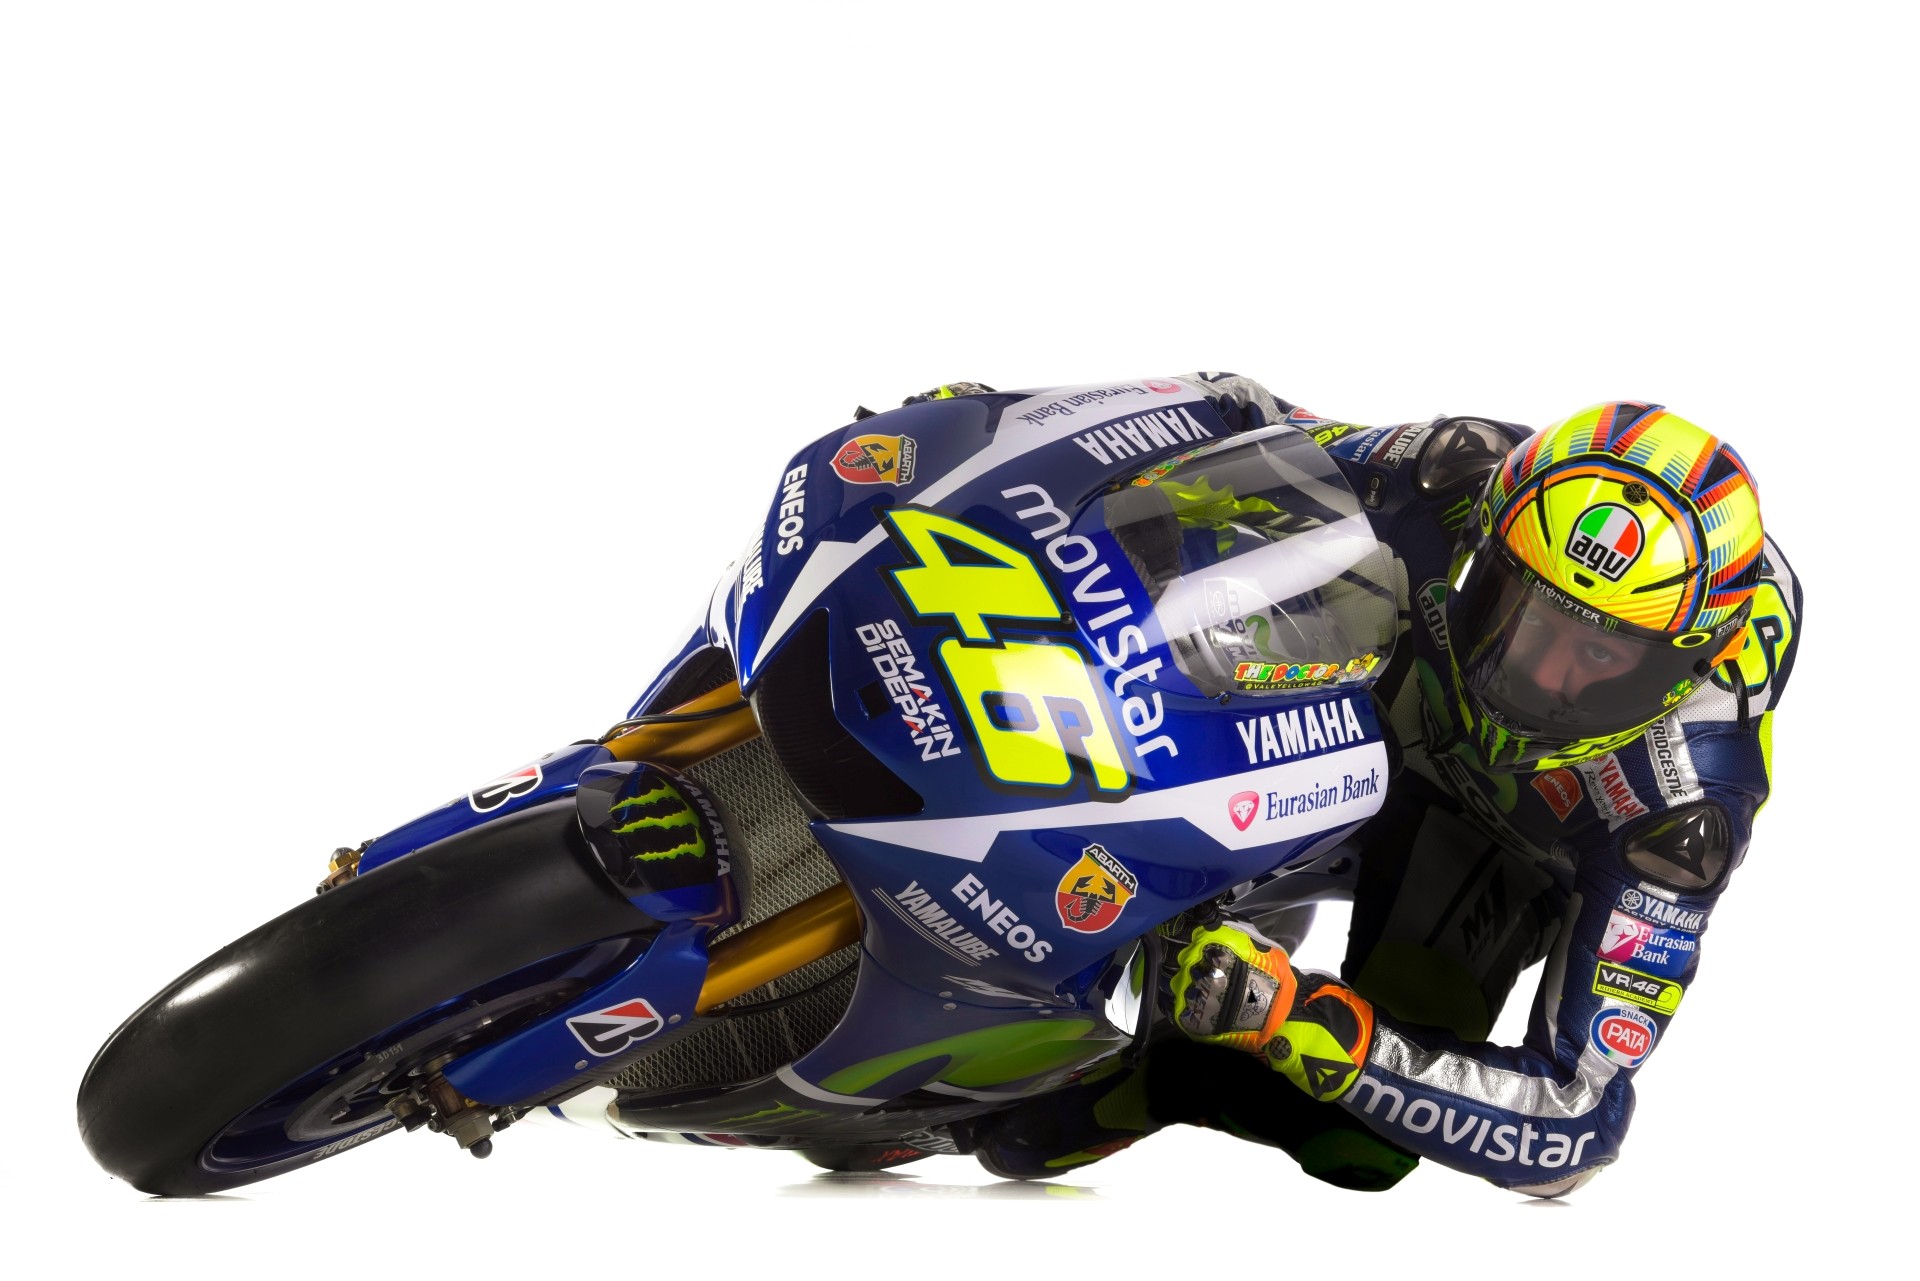 High Res Photos Of The 2015 Yamaha YZR M1 With Rossi And Lorenzo